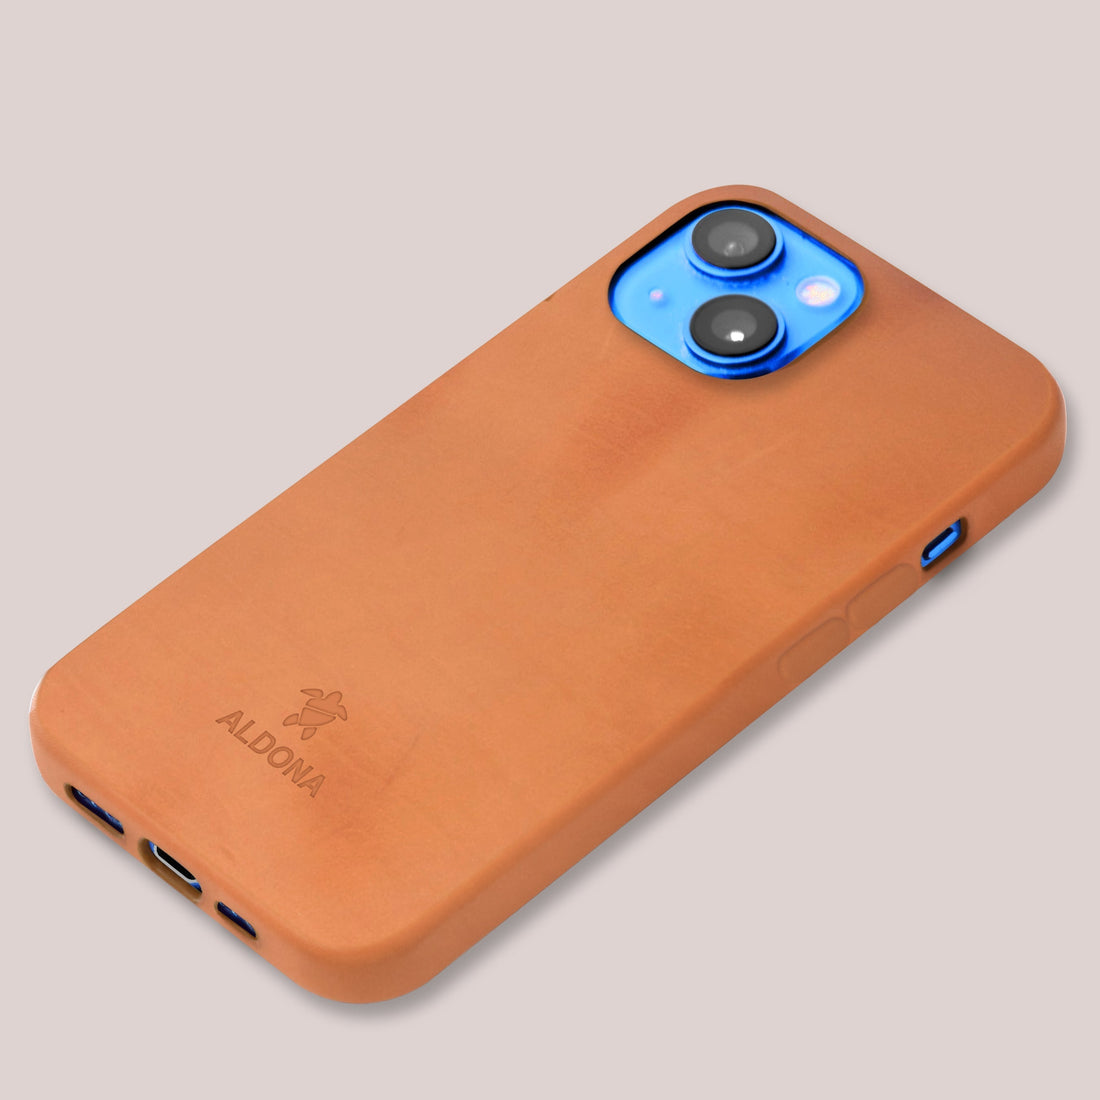 Kalon Case for iPhone 13 Pro Max with MagSafe Compatibility - Burnt Tobacco